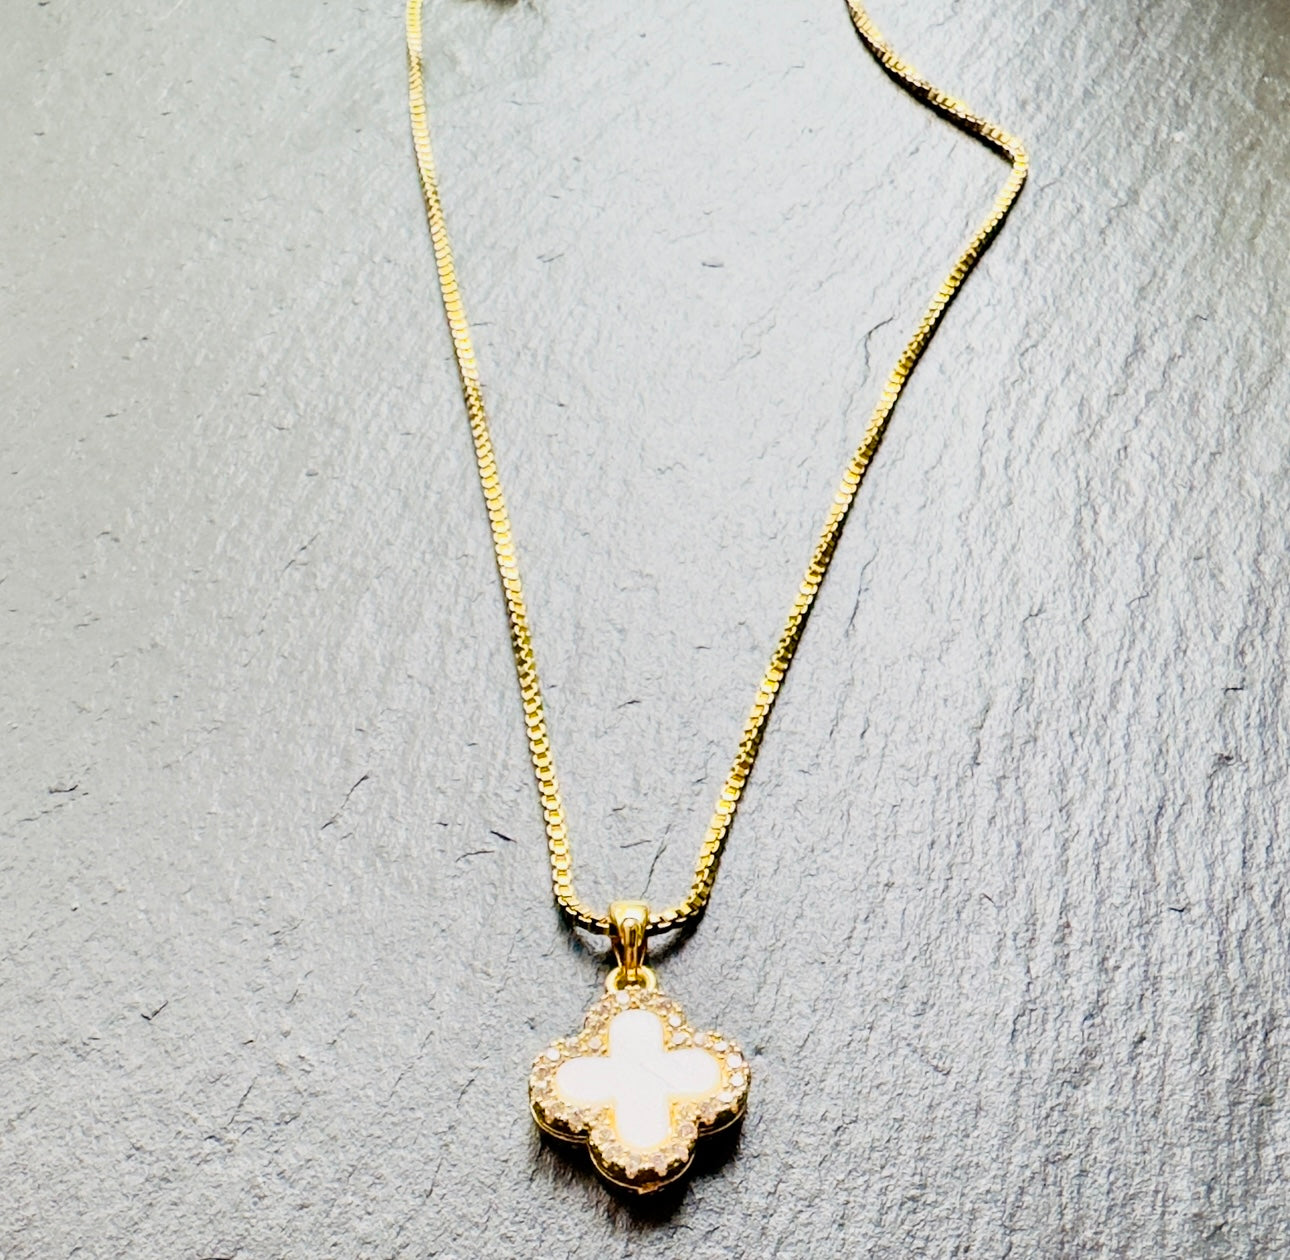 Charm of Fortune Dual-Sided Gold Clover Necklace